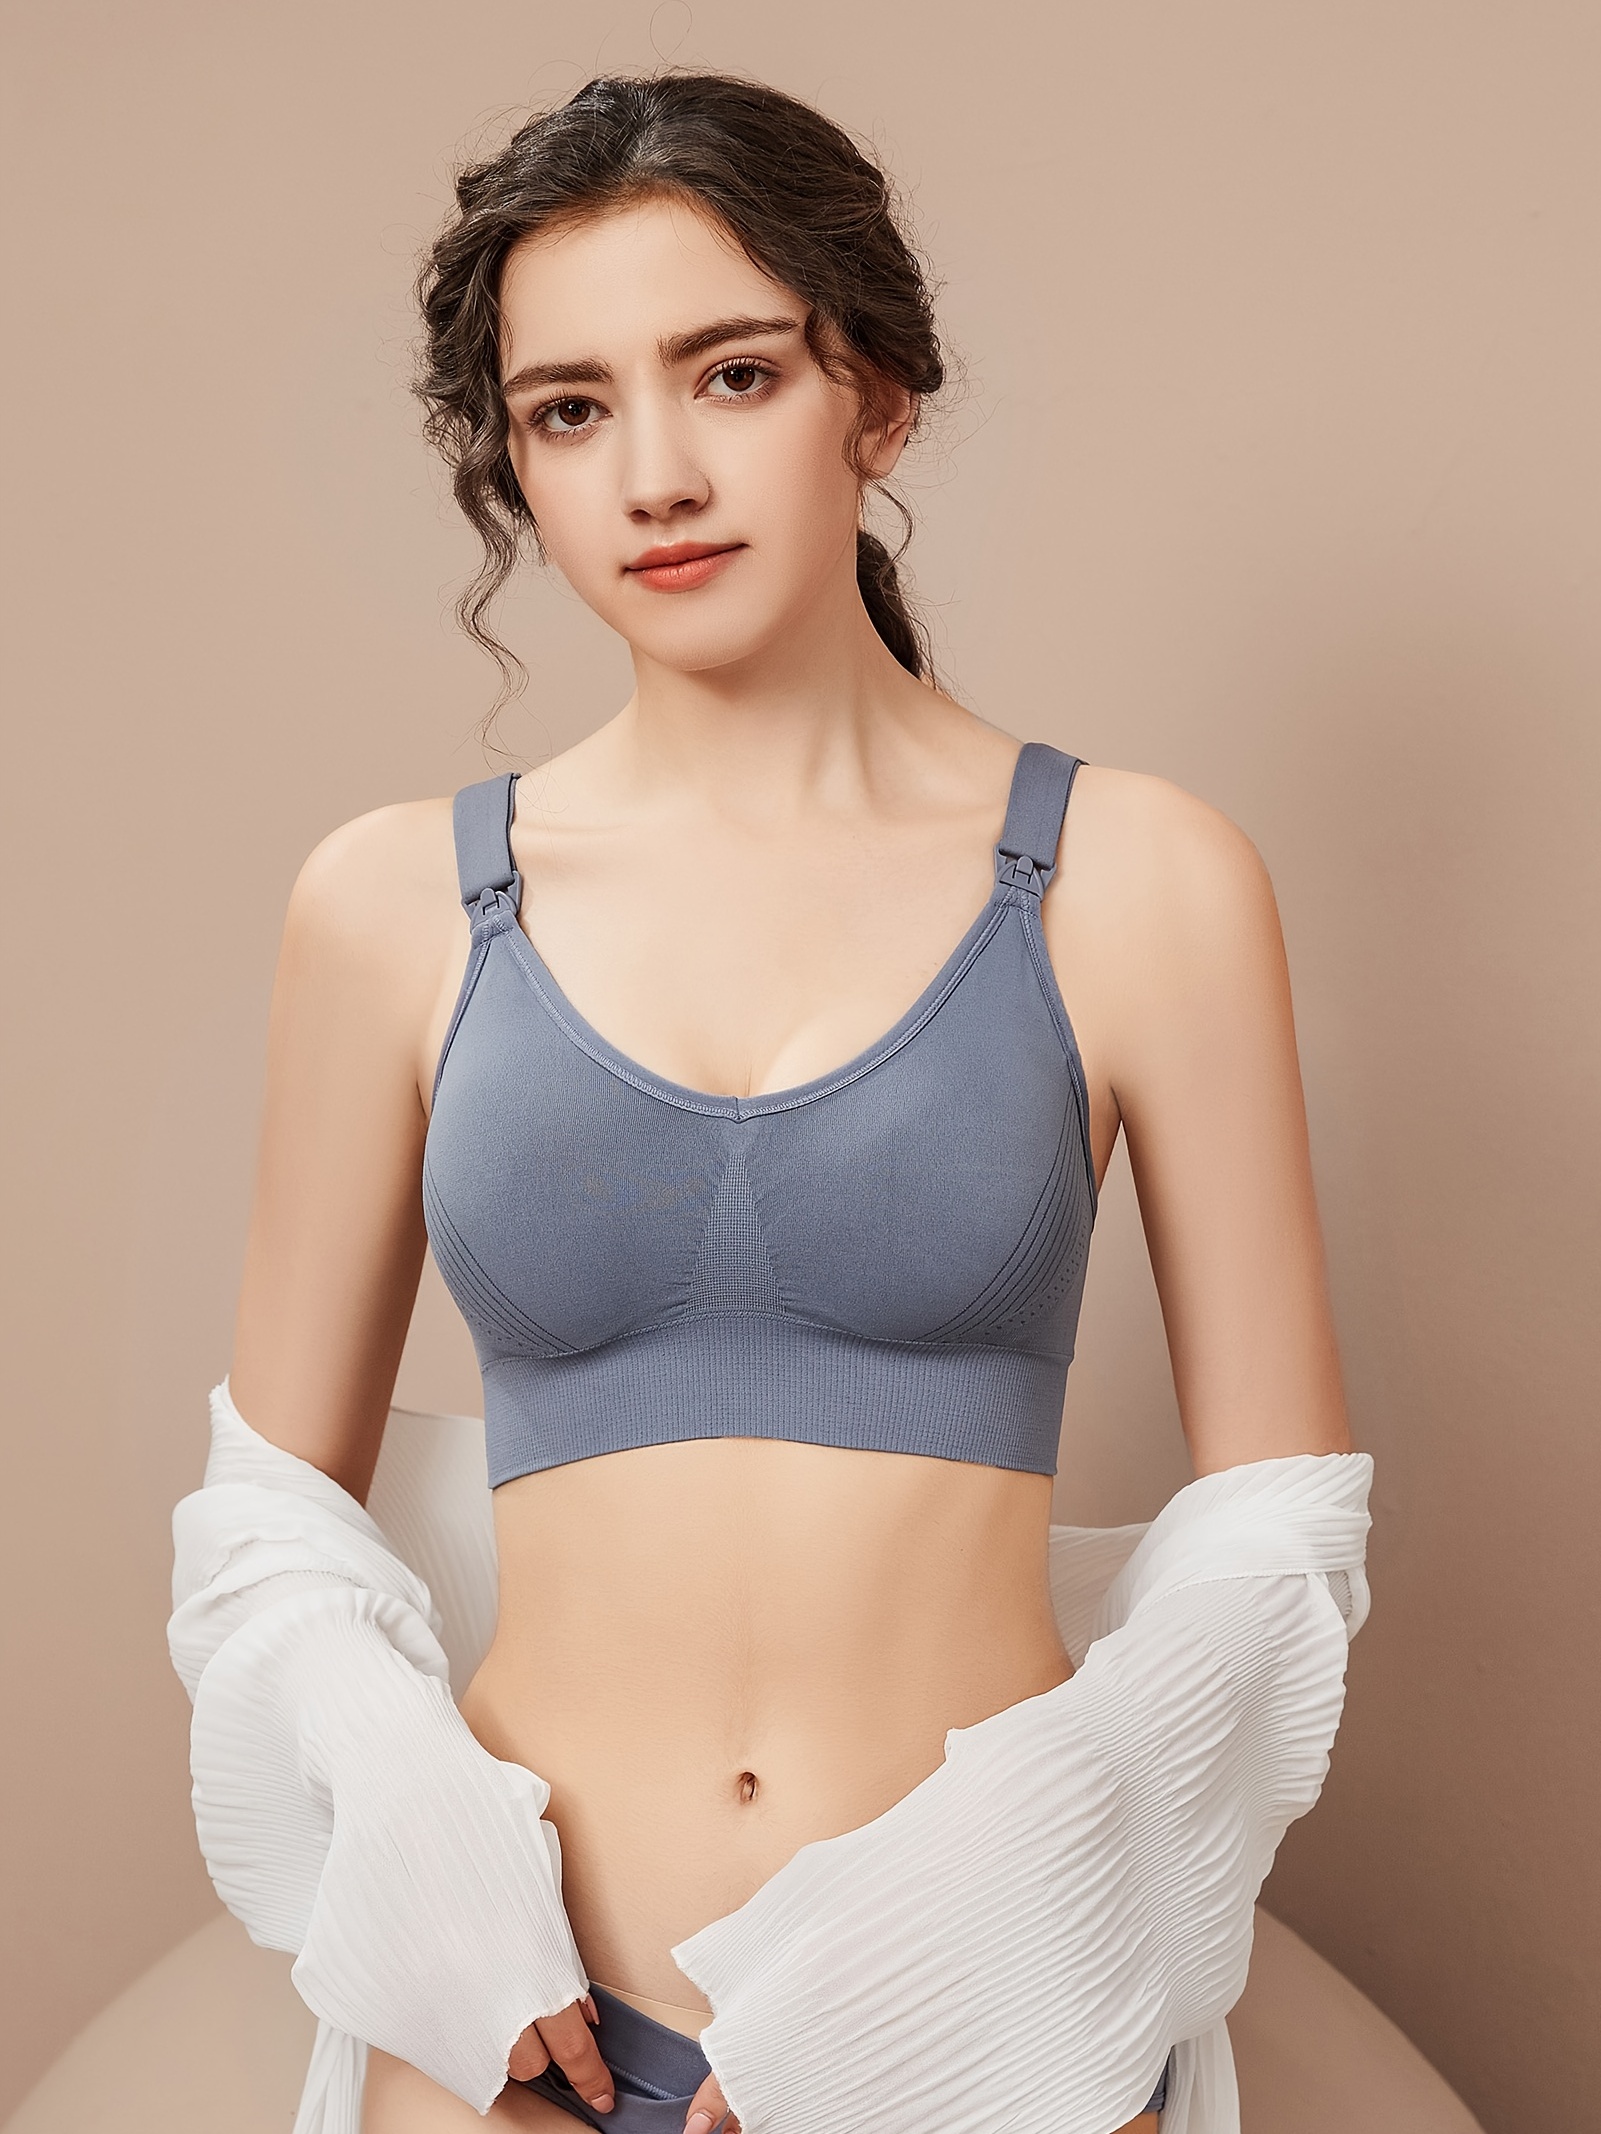 Sexy Lingerie Women Bra Gather Small Breasts to Close The Breasts to  Prevent Sagging Push Up Underwear Adjustable Bra (Color : Blue, Size : 40)